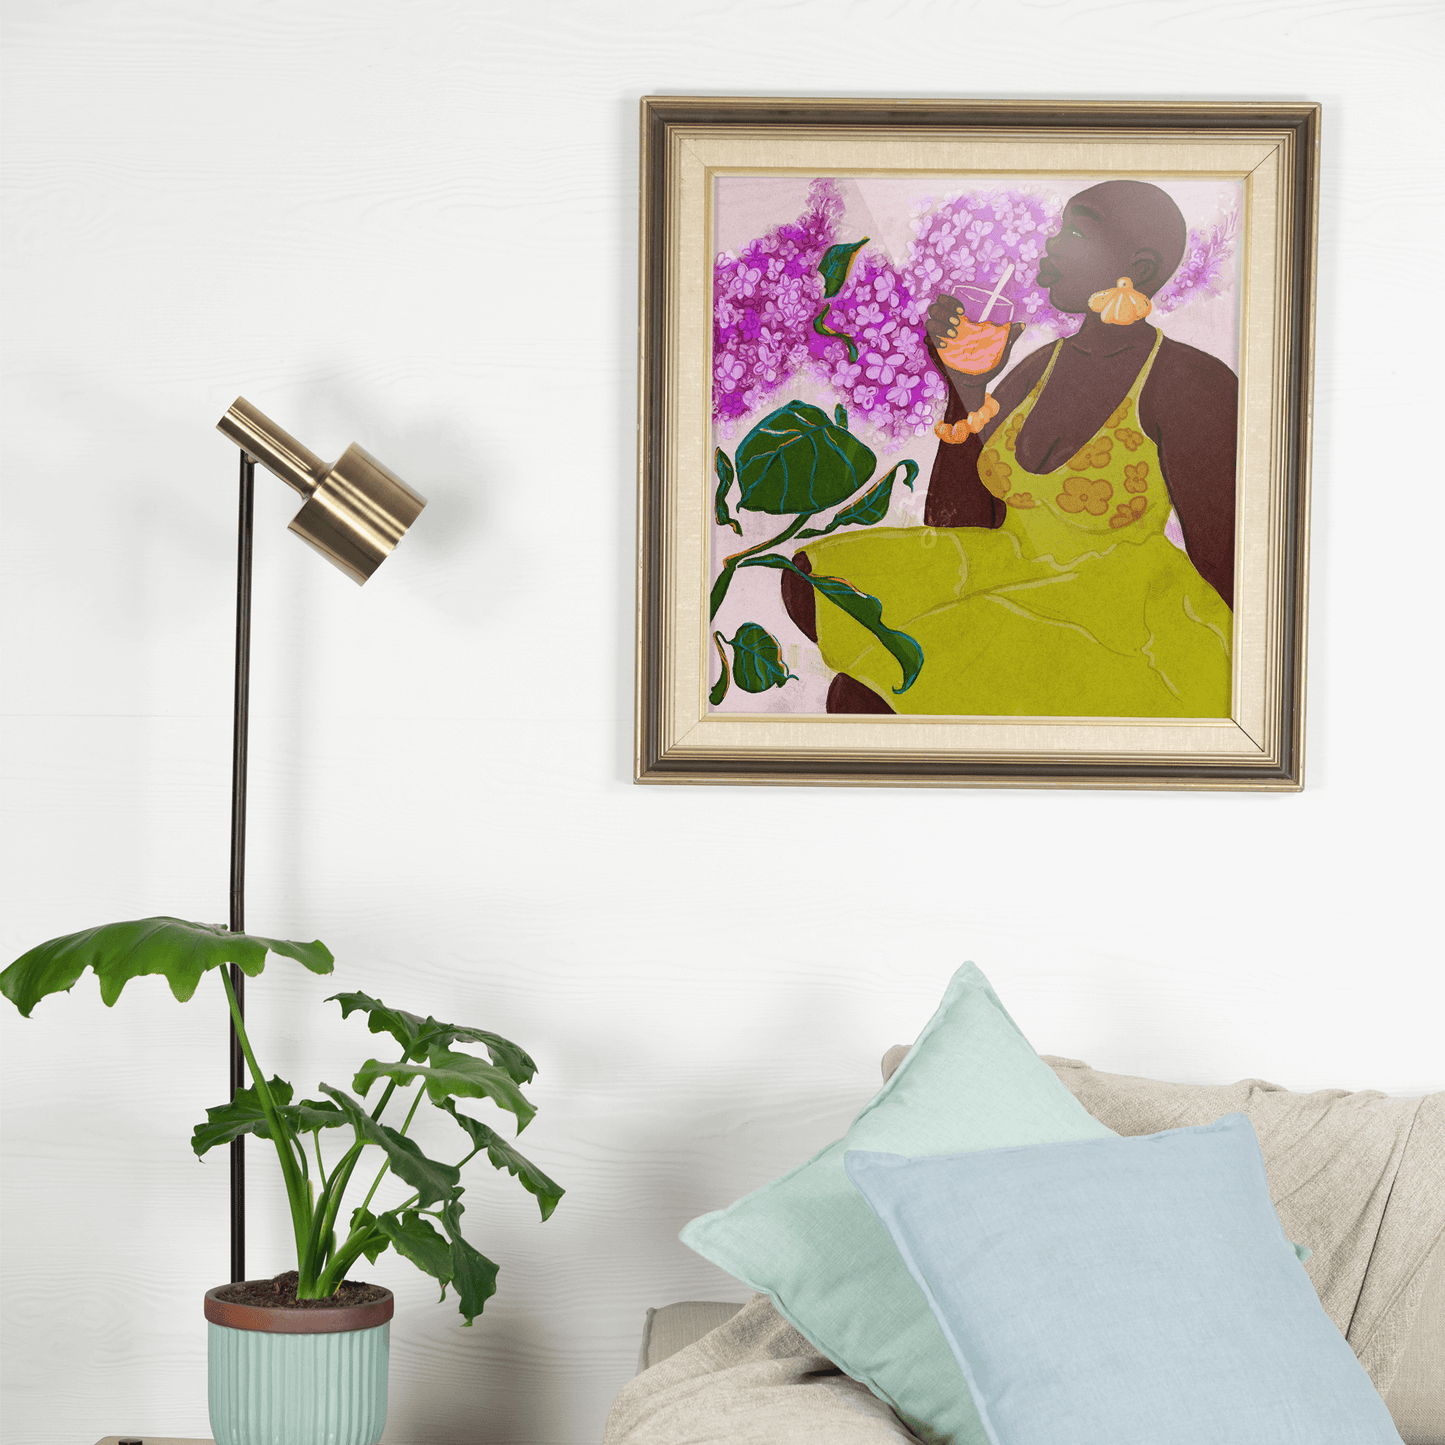 dress up your walls with this elegant natural black beauty. African American art print of woman in summery floral sundress against lavender flowers. MoGigi™